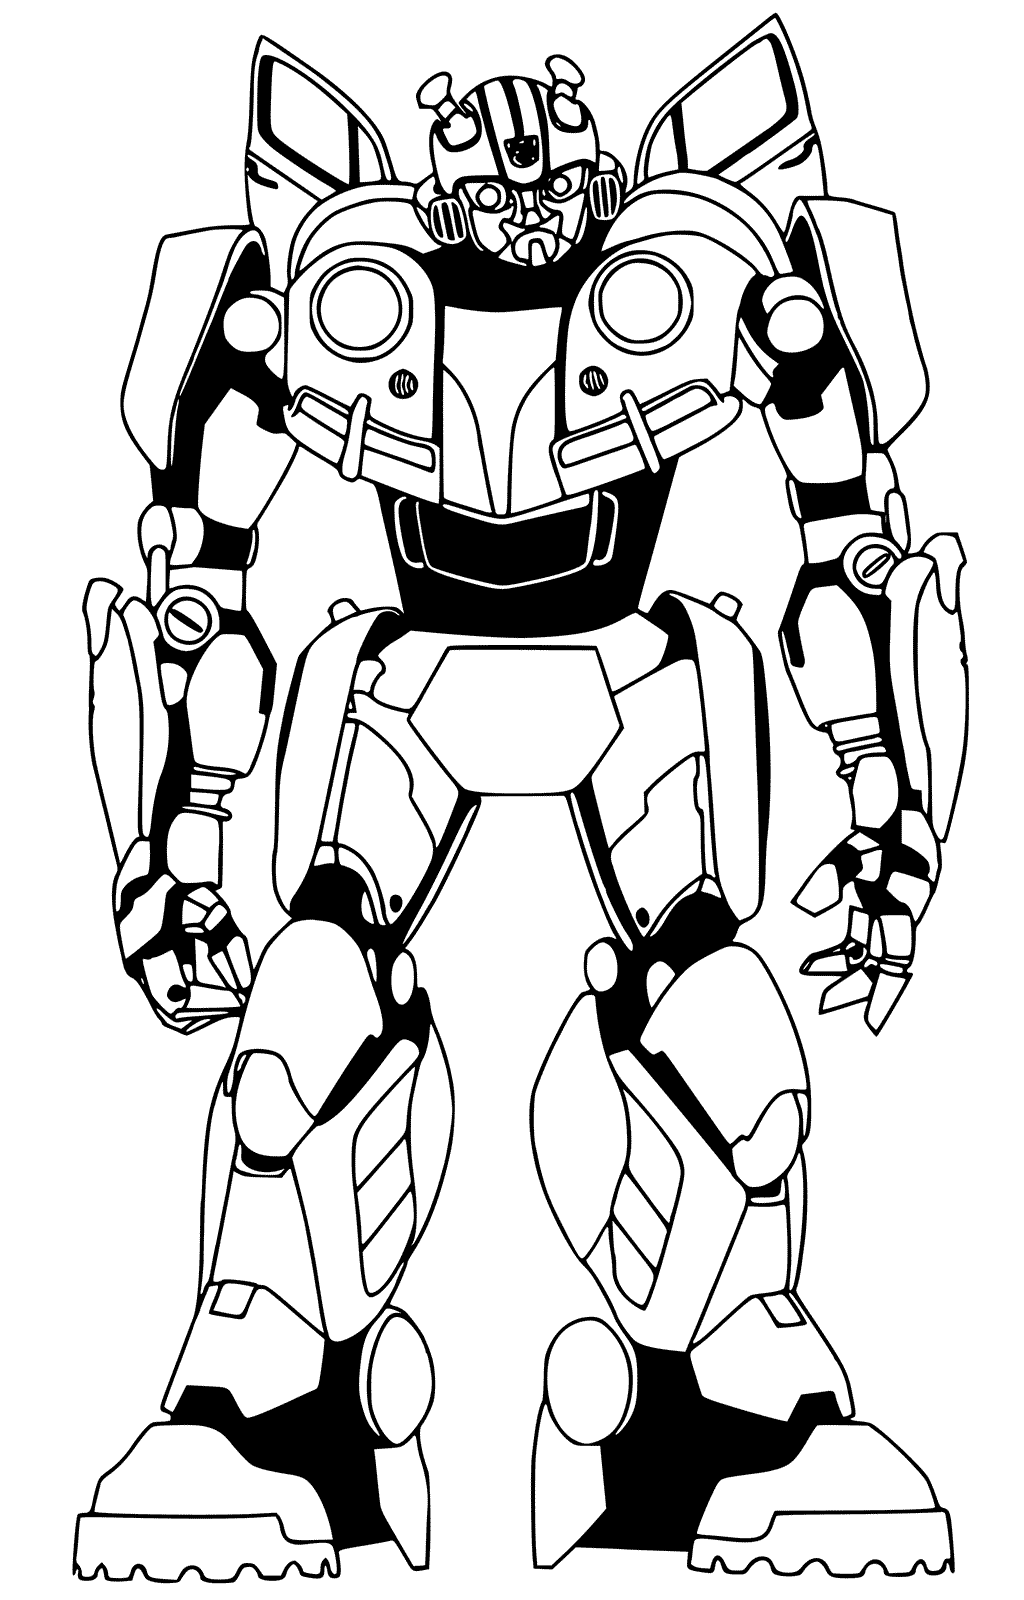 Bumblebee Coloring Page Coloring Page For Kids Coloring Home